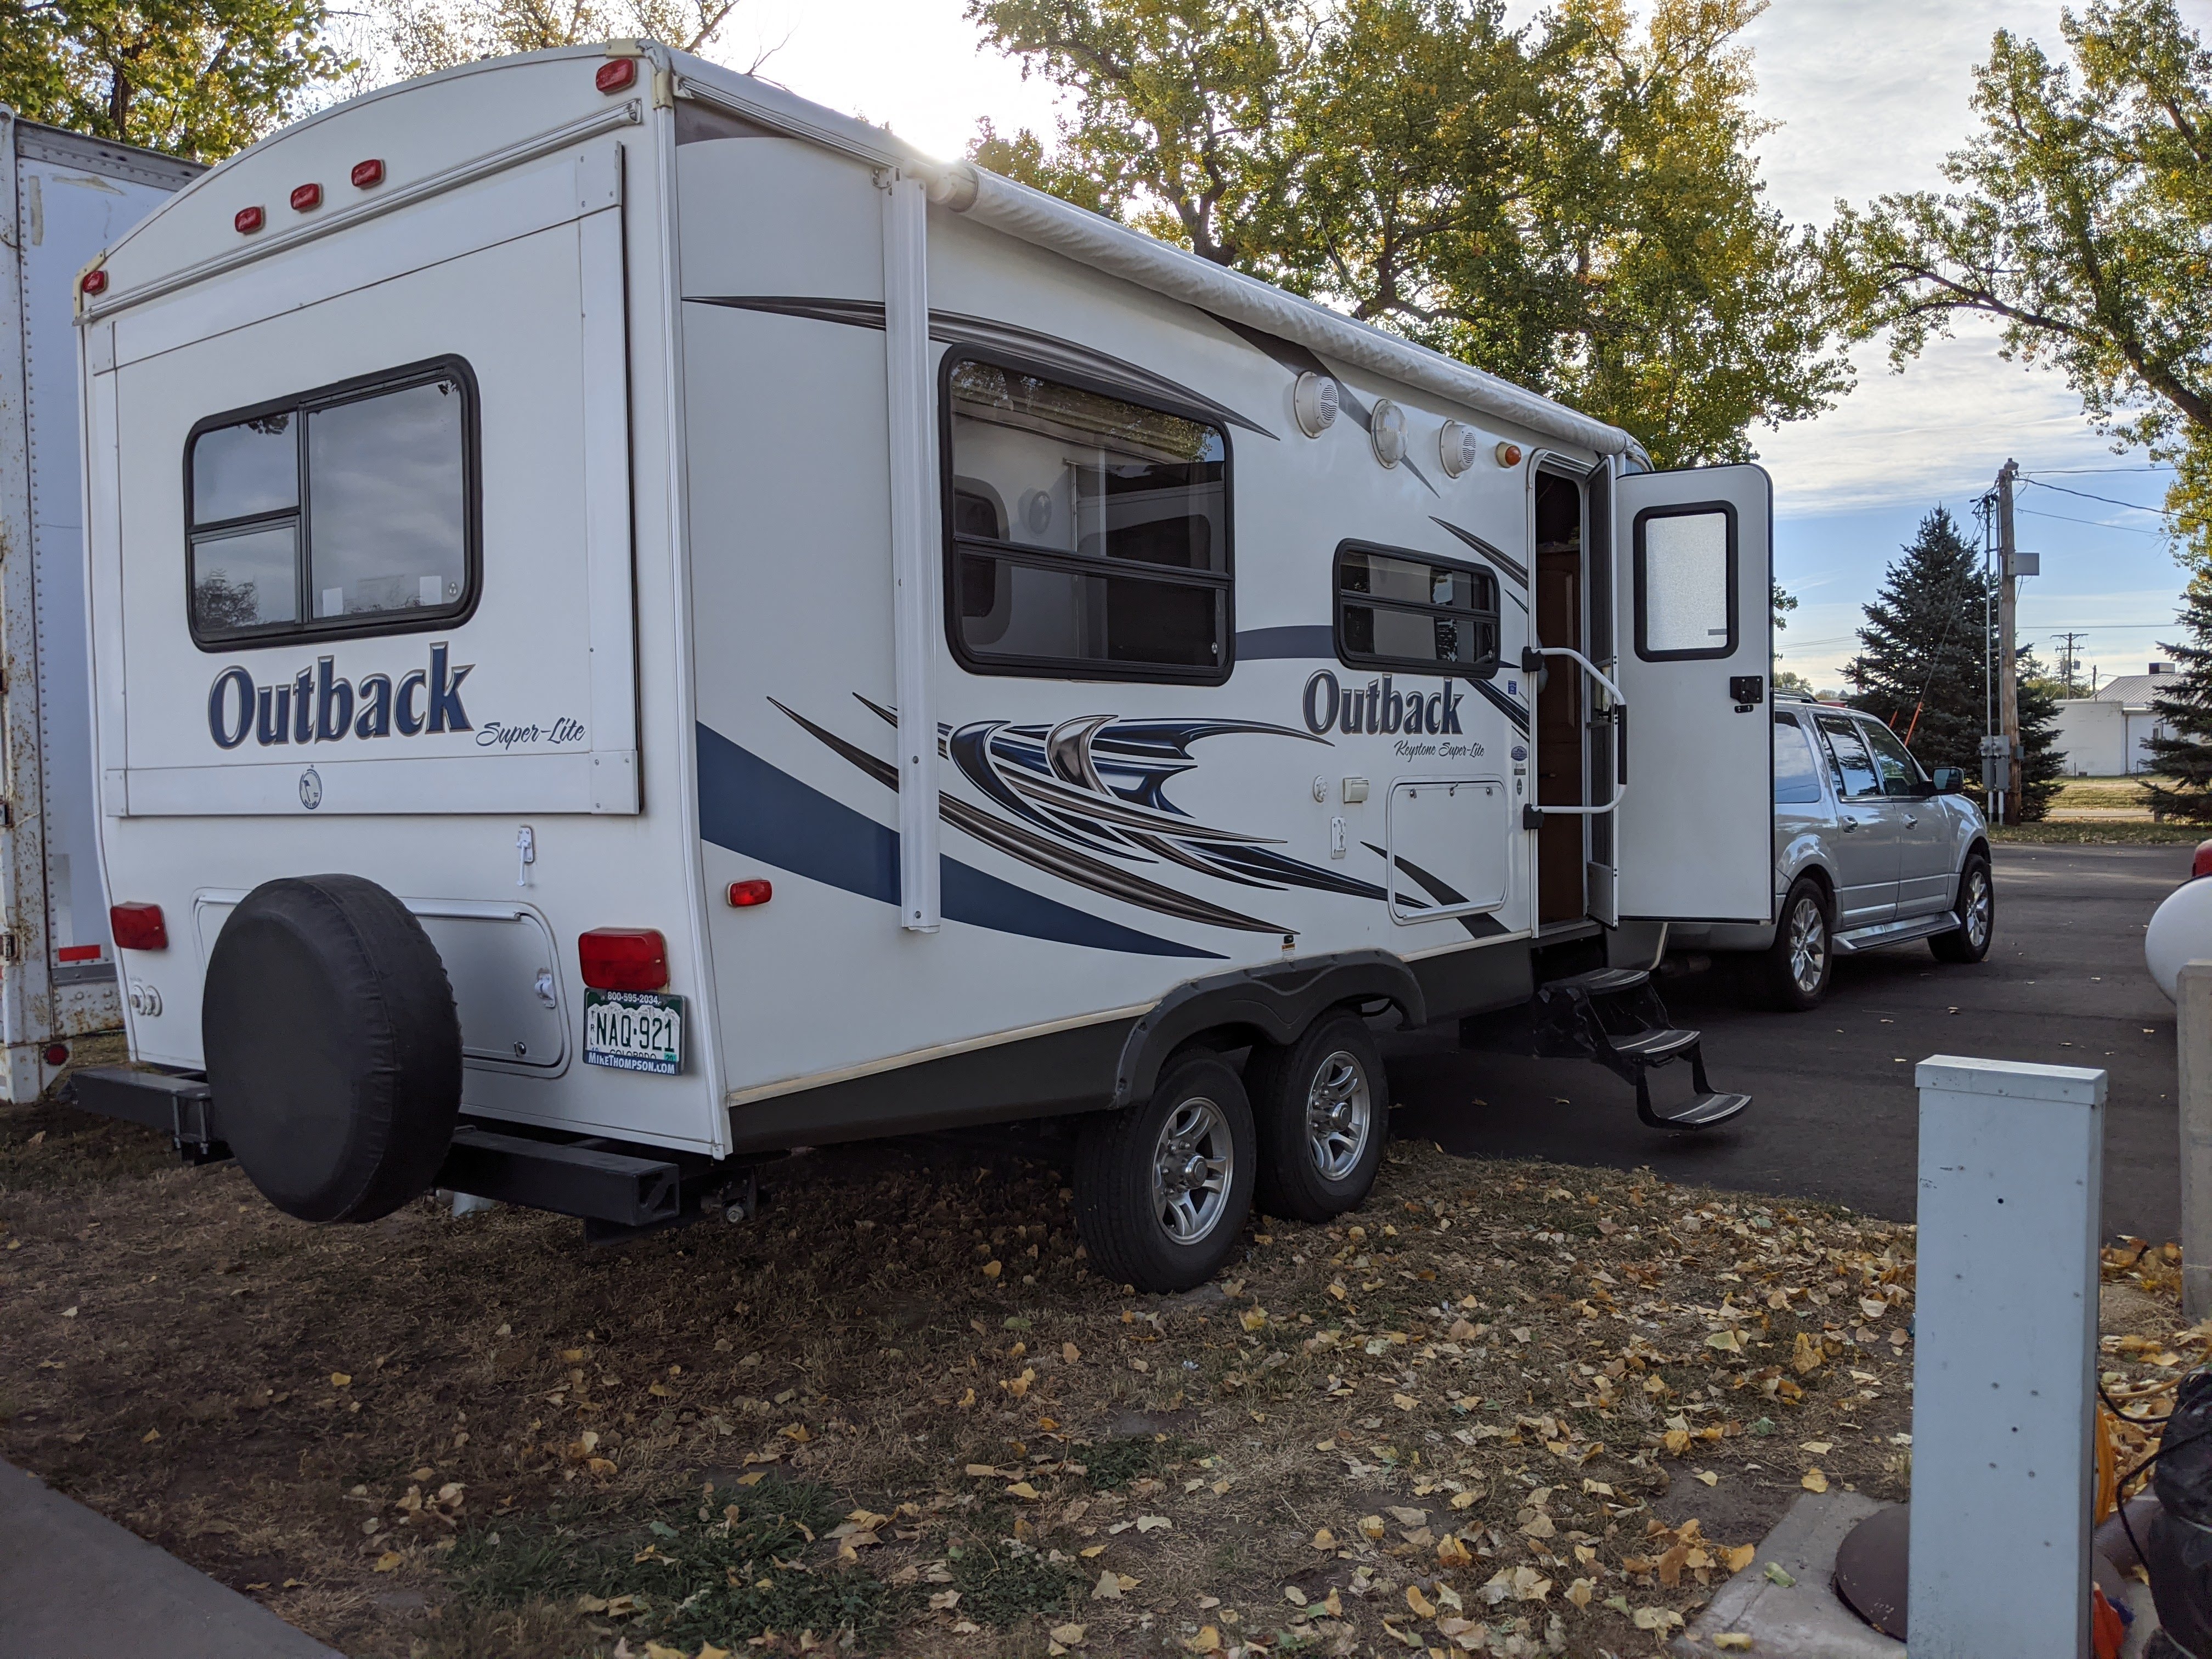 rig close to others in paved RV park(ing lot)